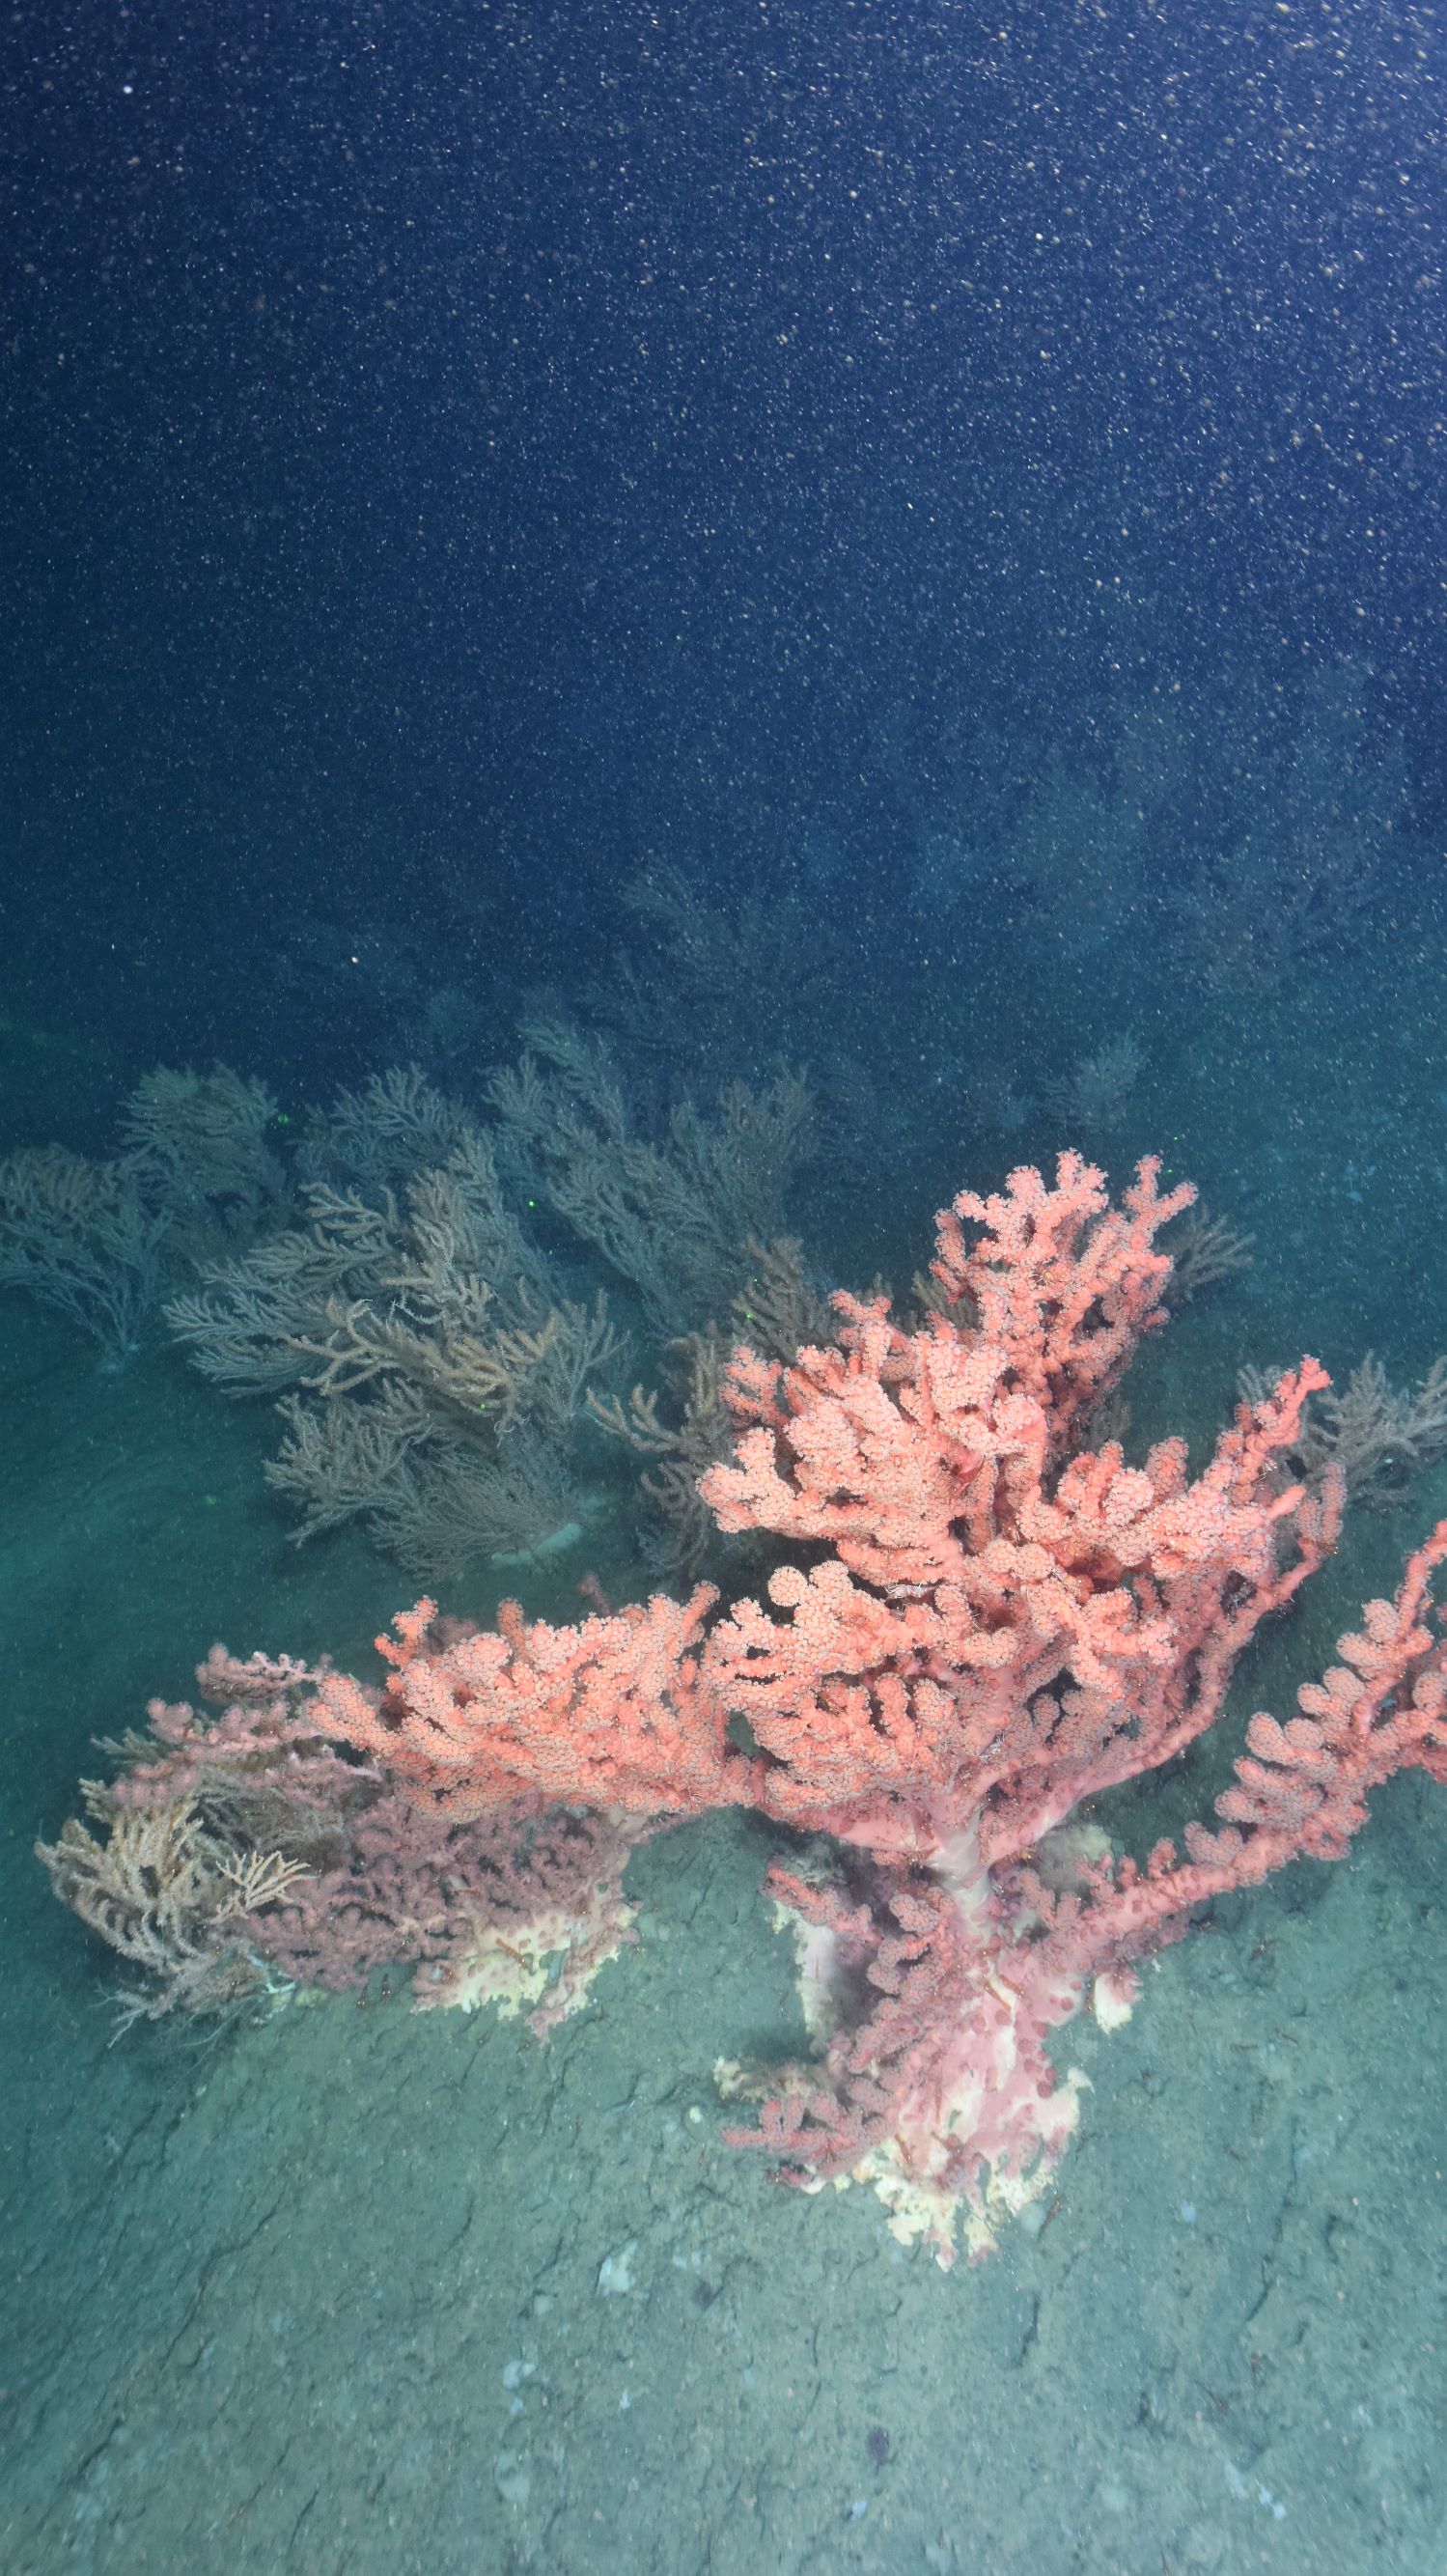 Bubblegum coral, Paragorgia arborea, on the seafloor in the Fundian Channel.